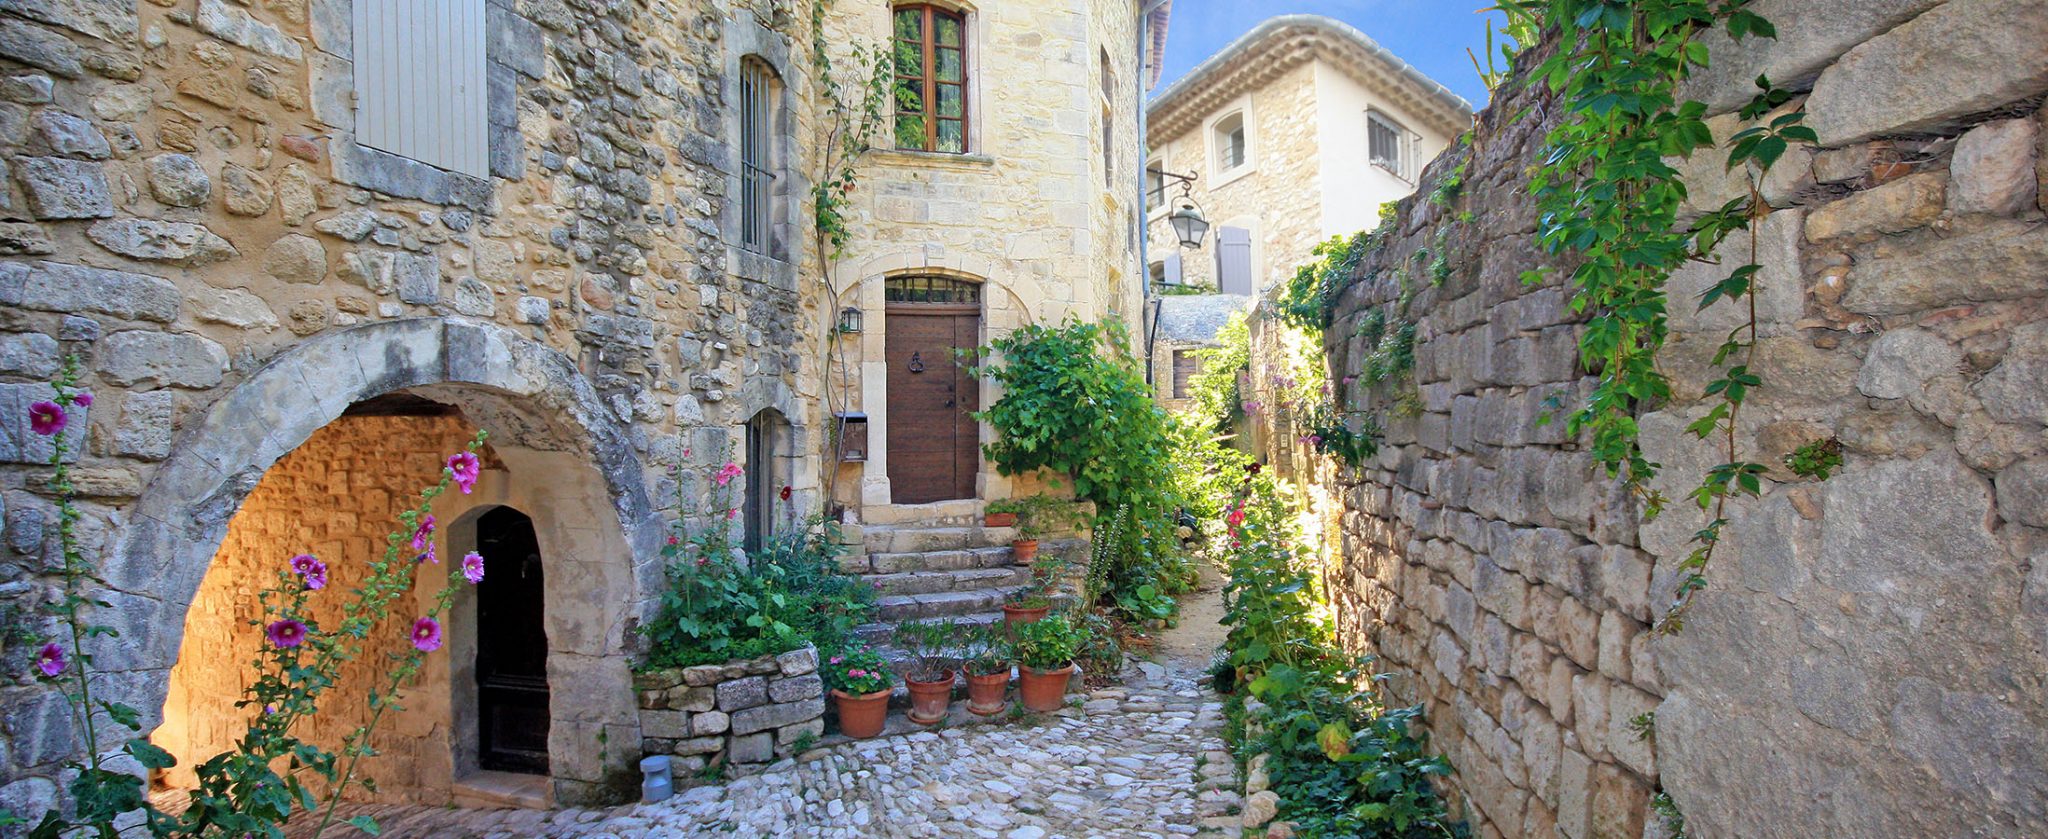 Astonishing path through the old town and rustic buildings